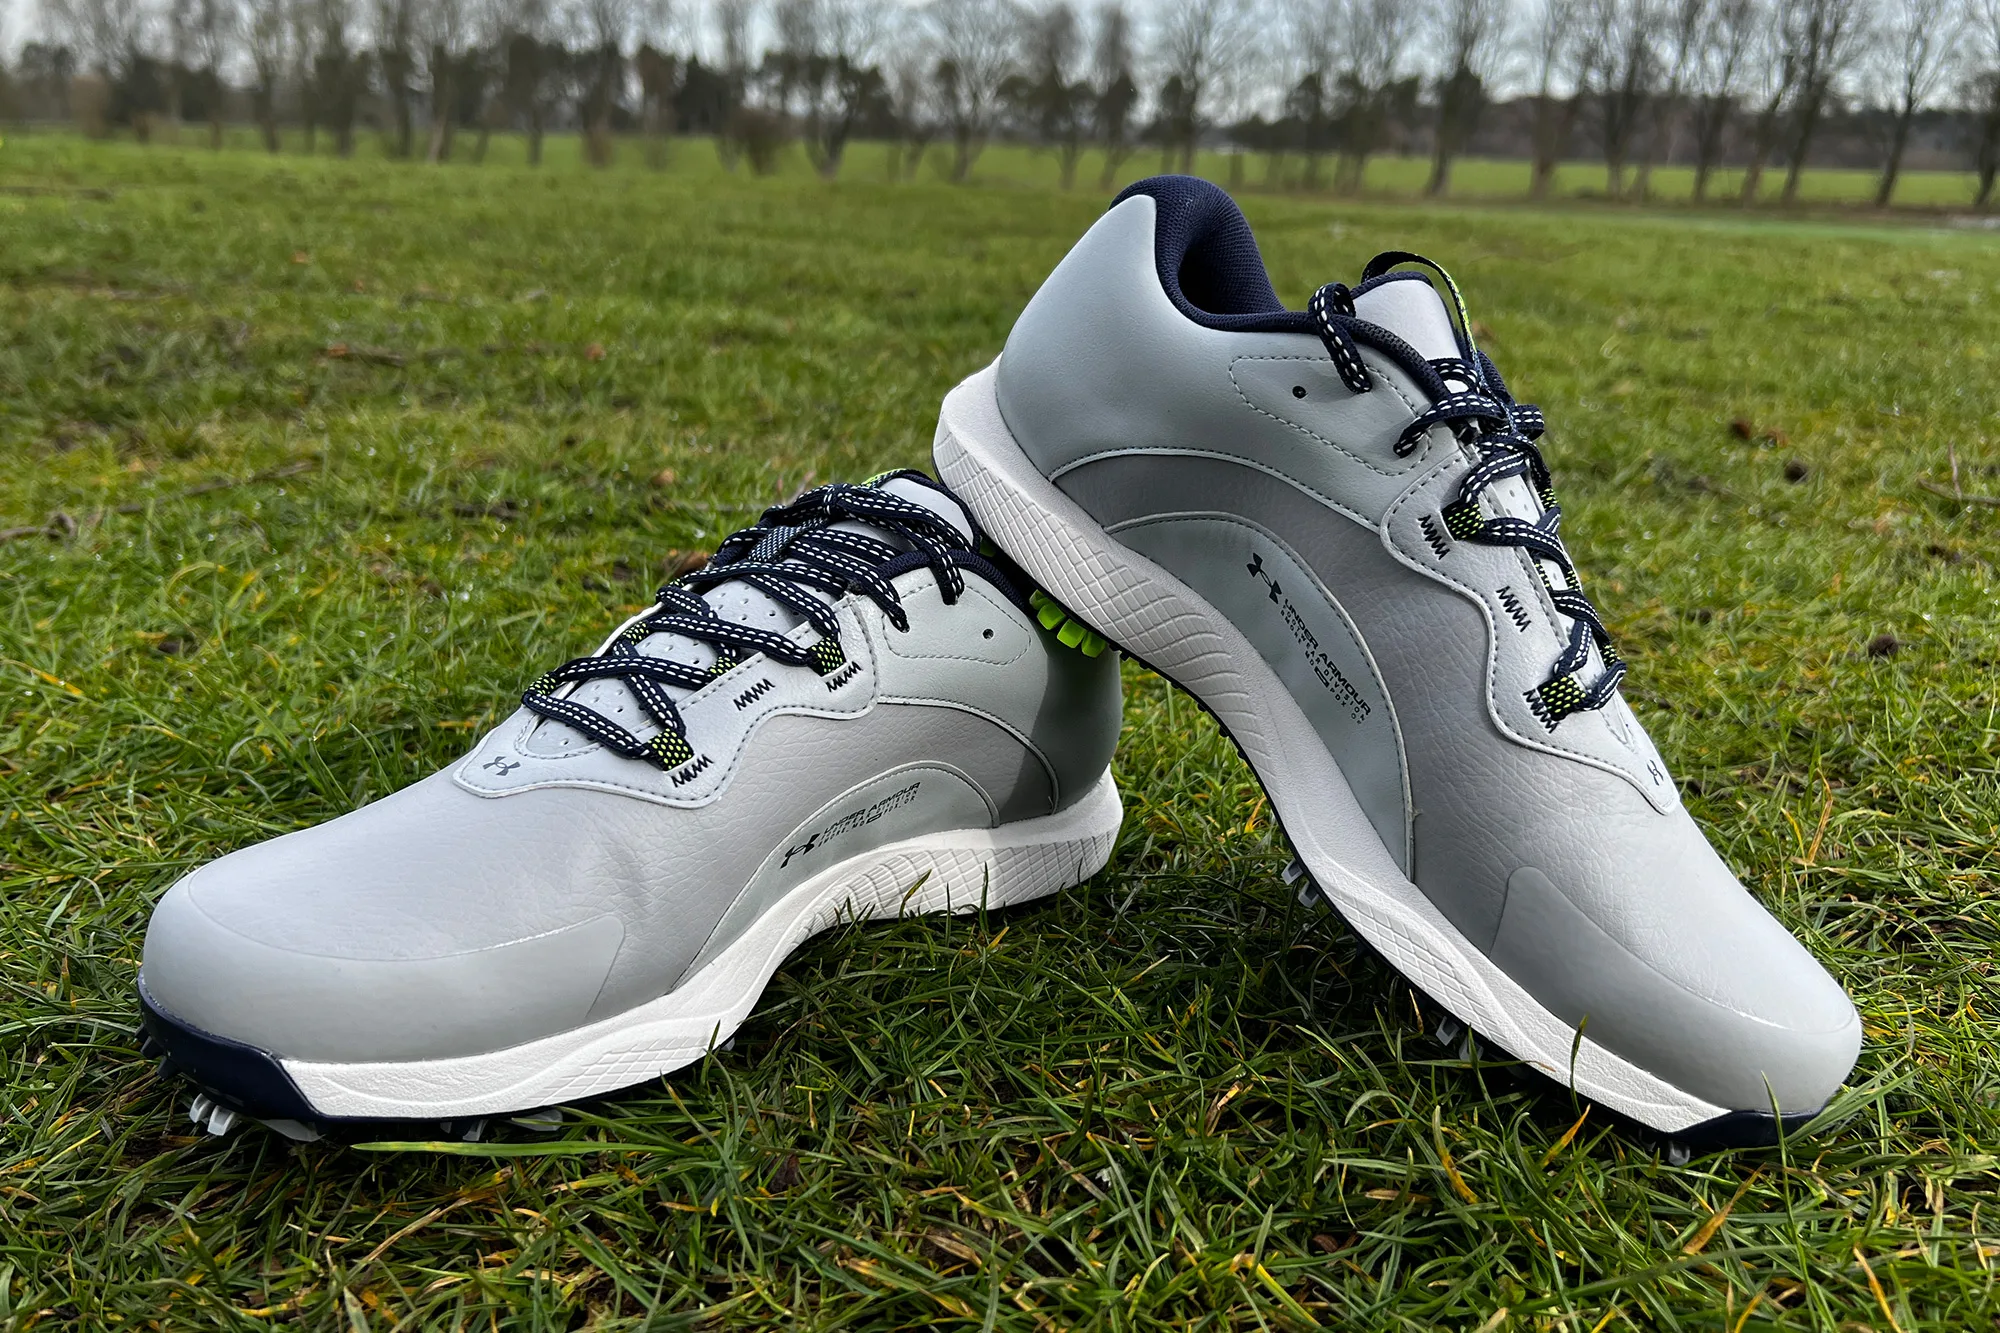 Under Armour Charged Draw 2 Golf Shoe Review